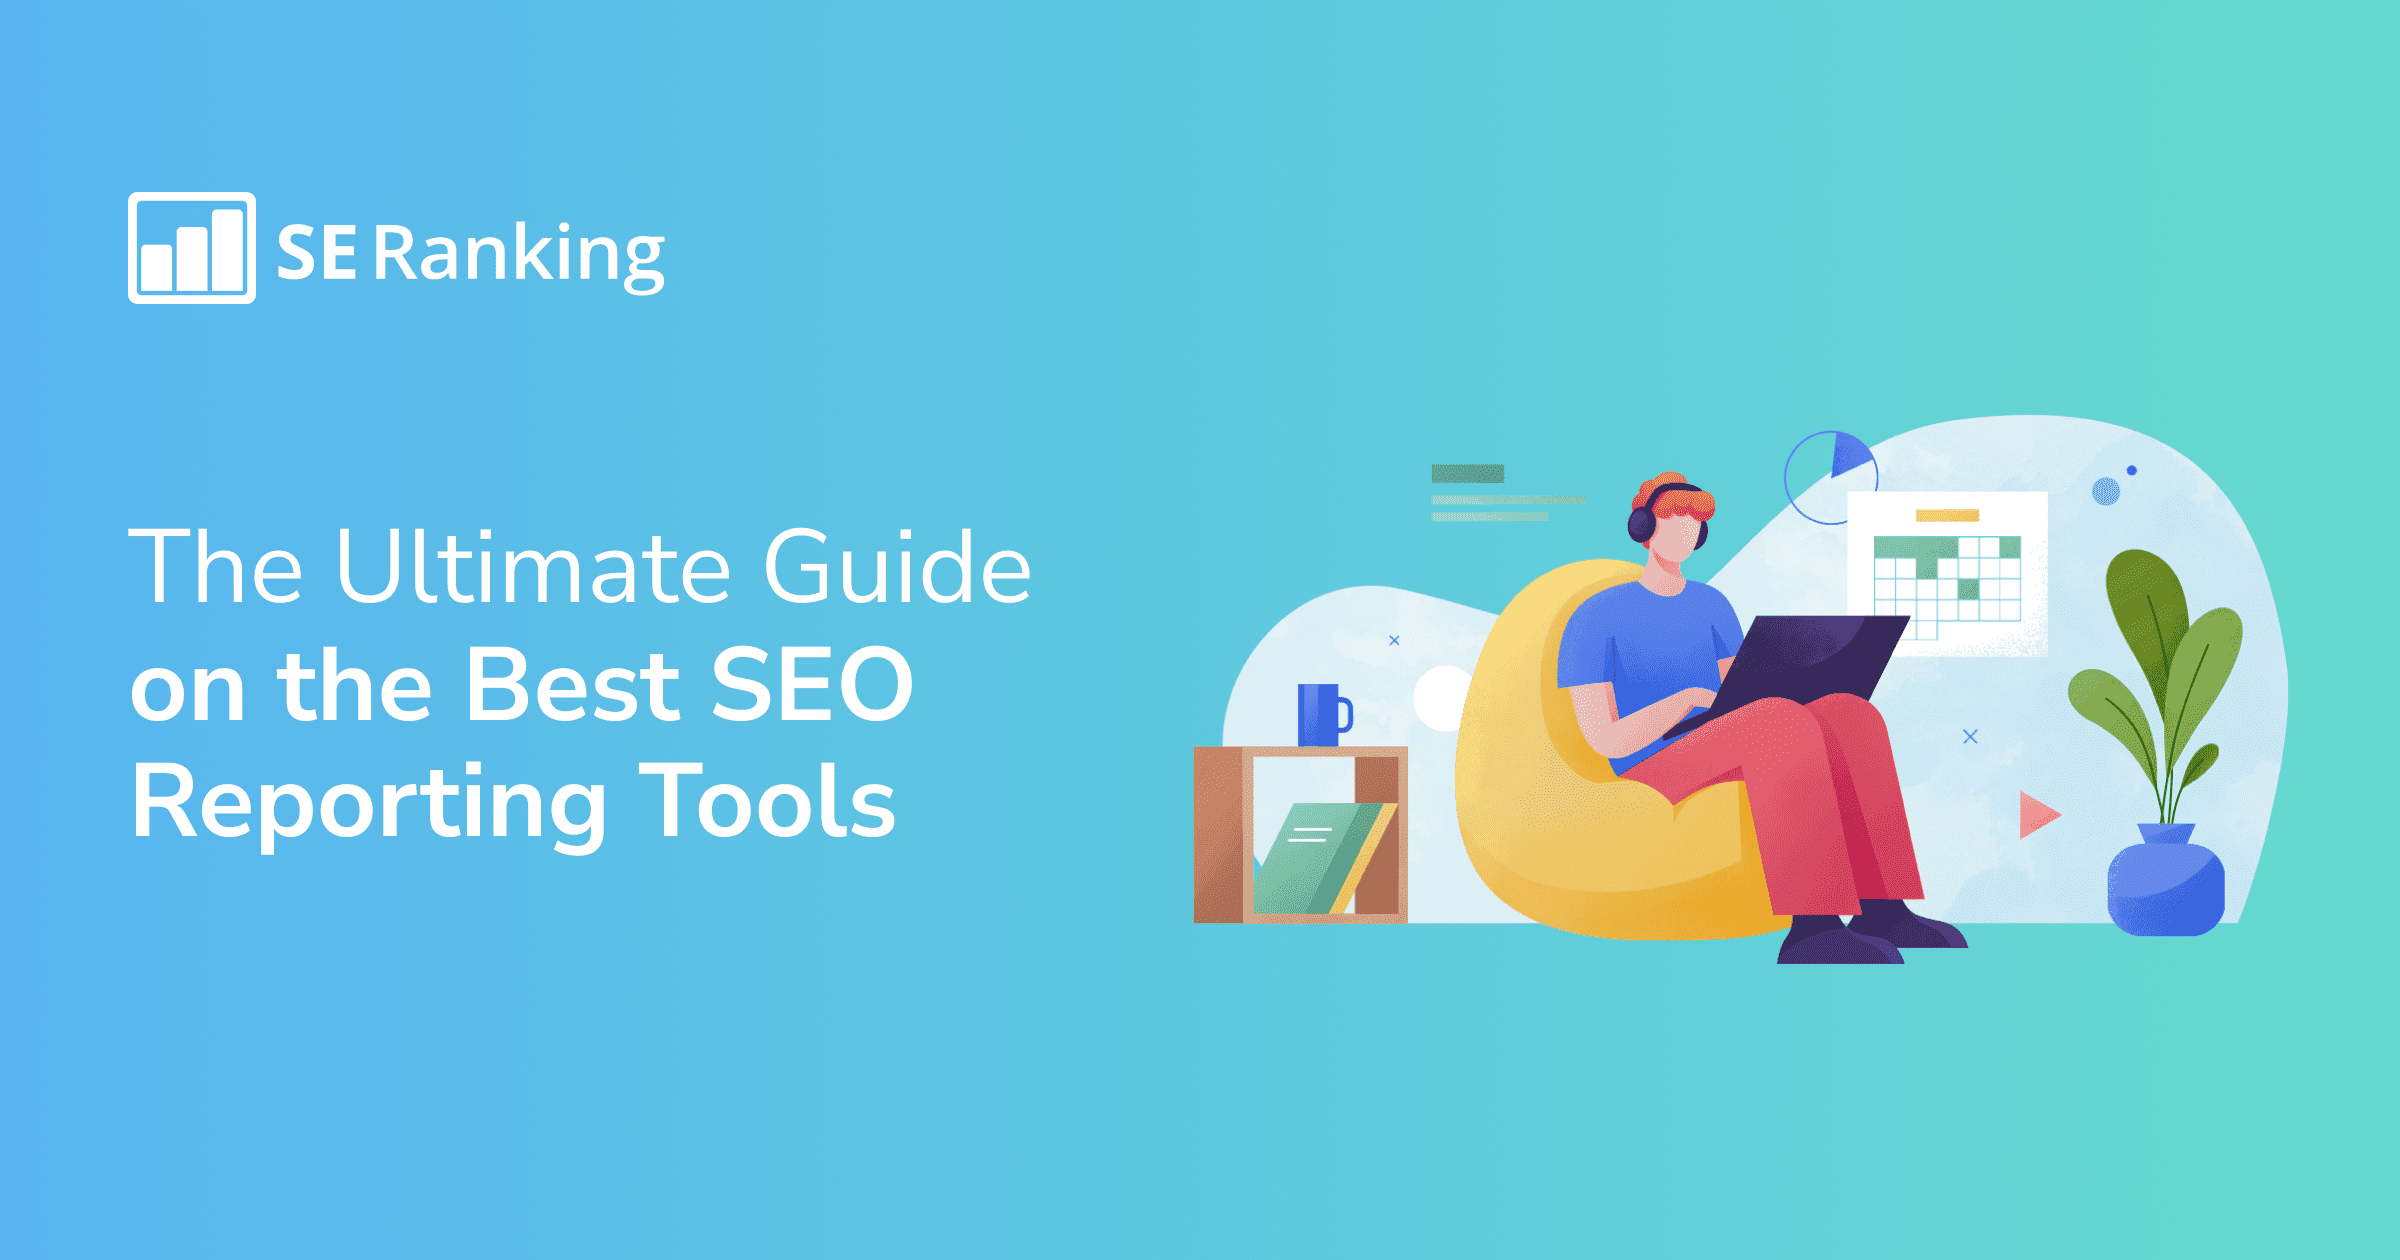 12 Best SEO Reporting Tools to Consider in 2023